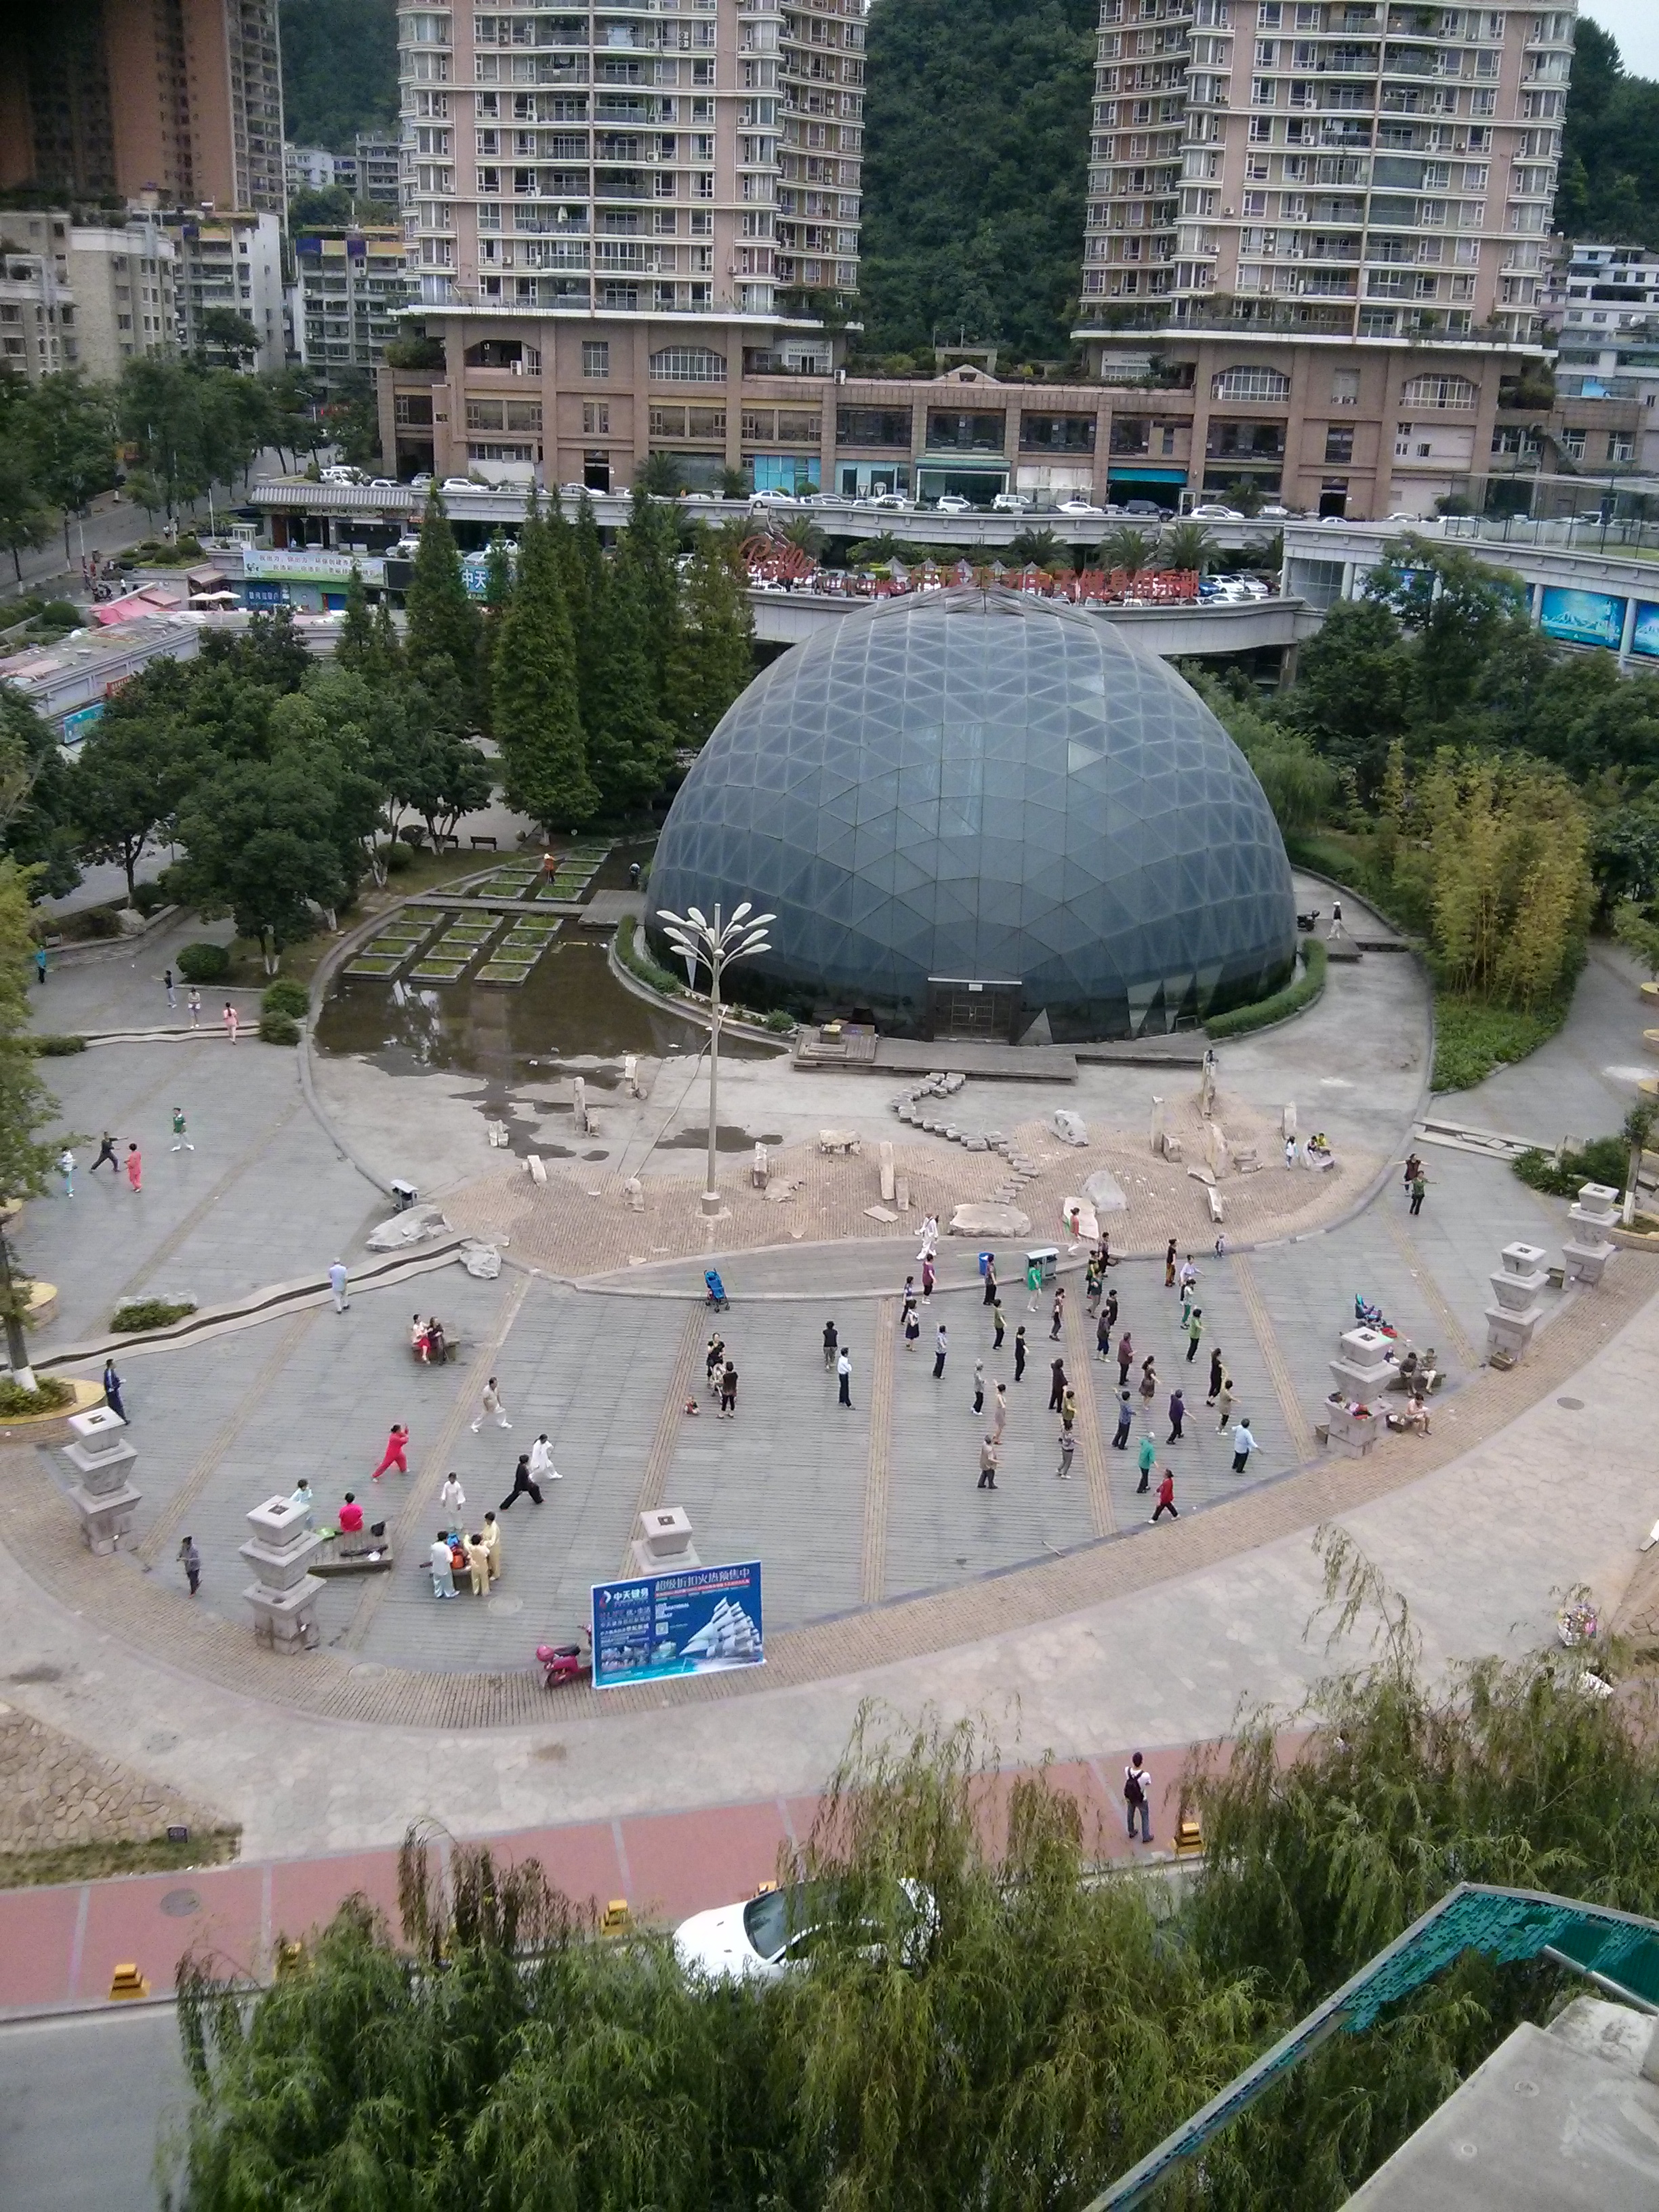 This was the view from the bedroom of our old apartment. The dome is Zhong Tian's pool and the courtyard in front of the dome is where the neighbors excercise in the morning, dance at night and practice gong fu daily 